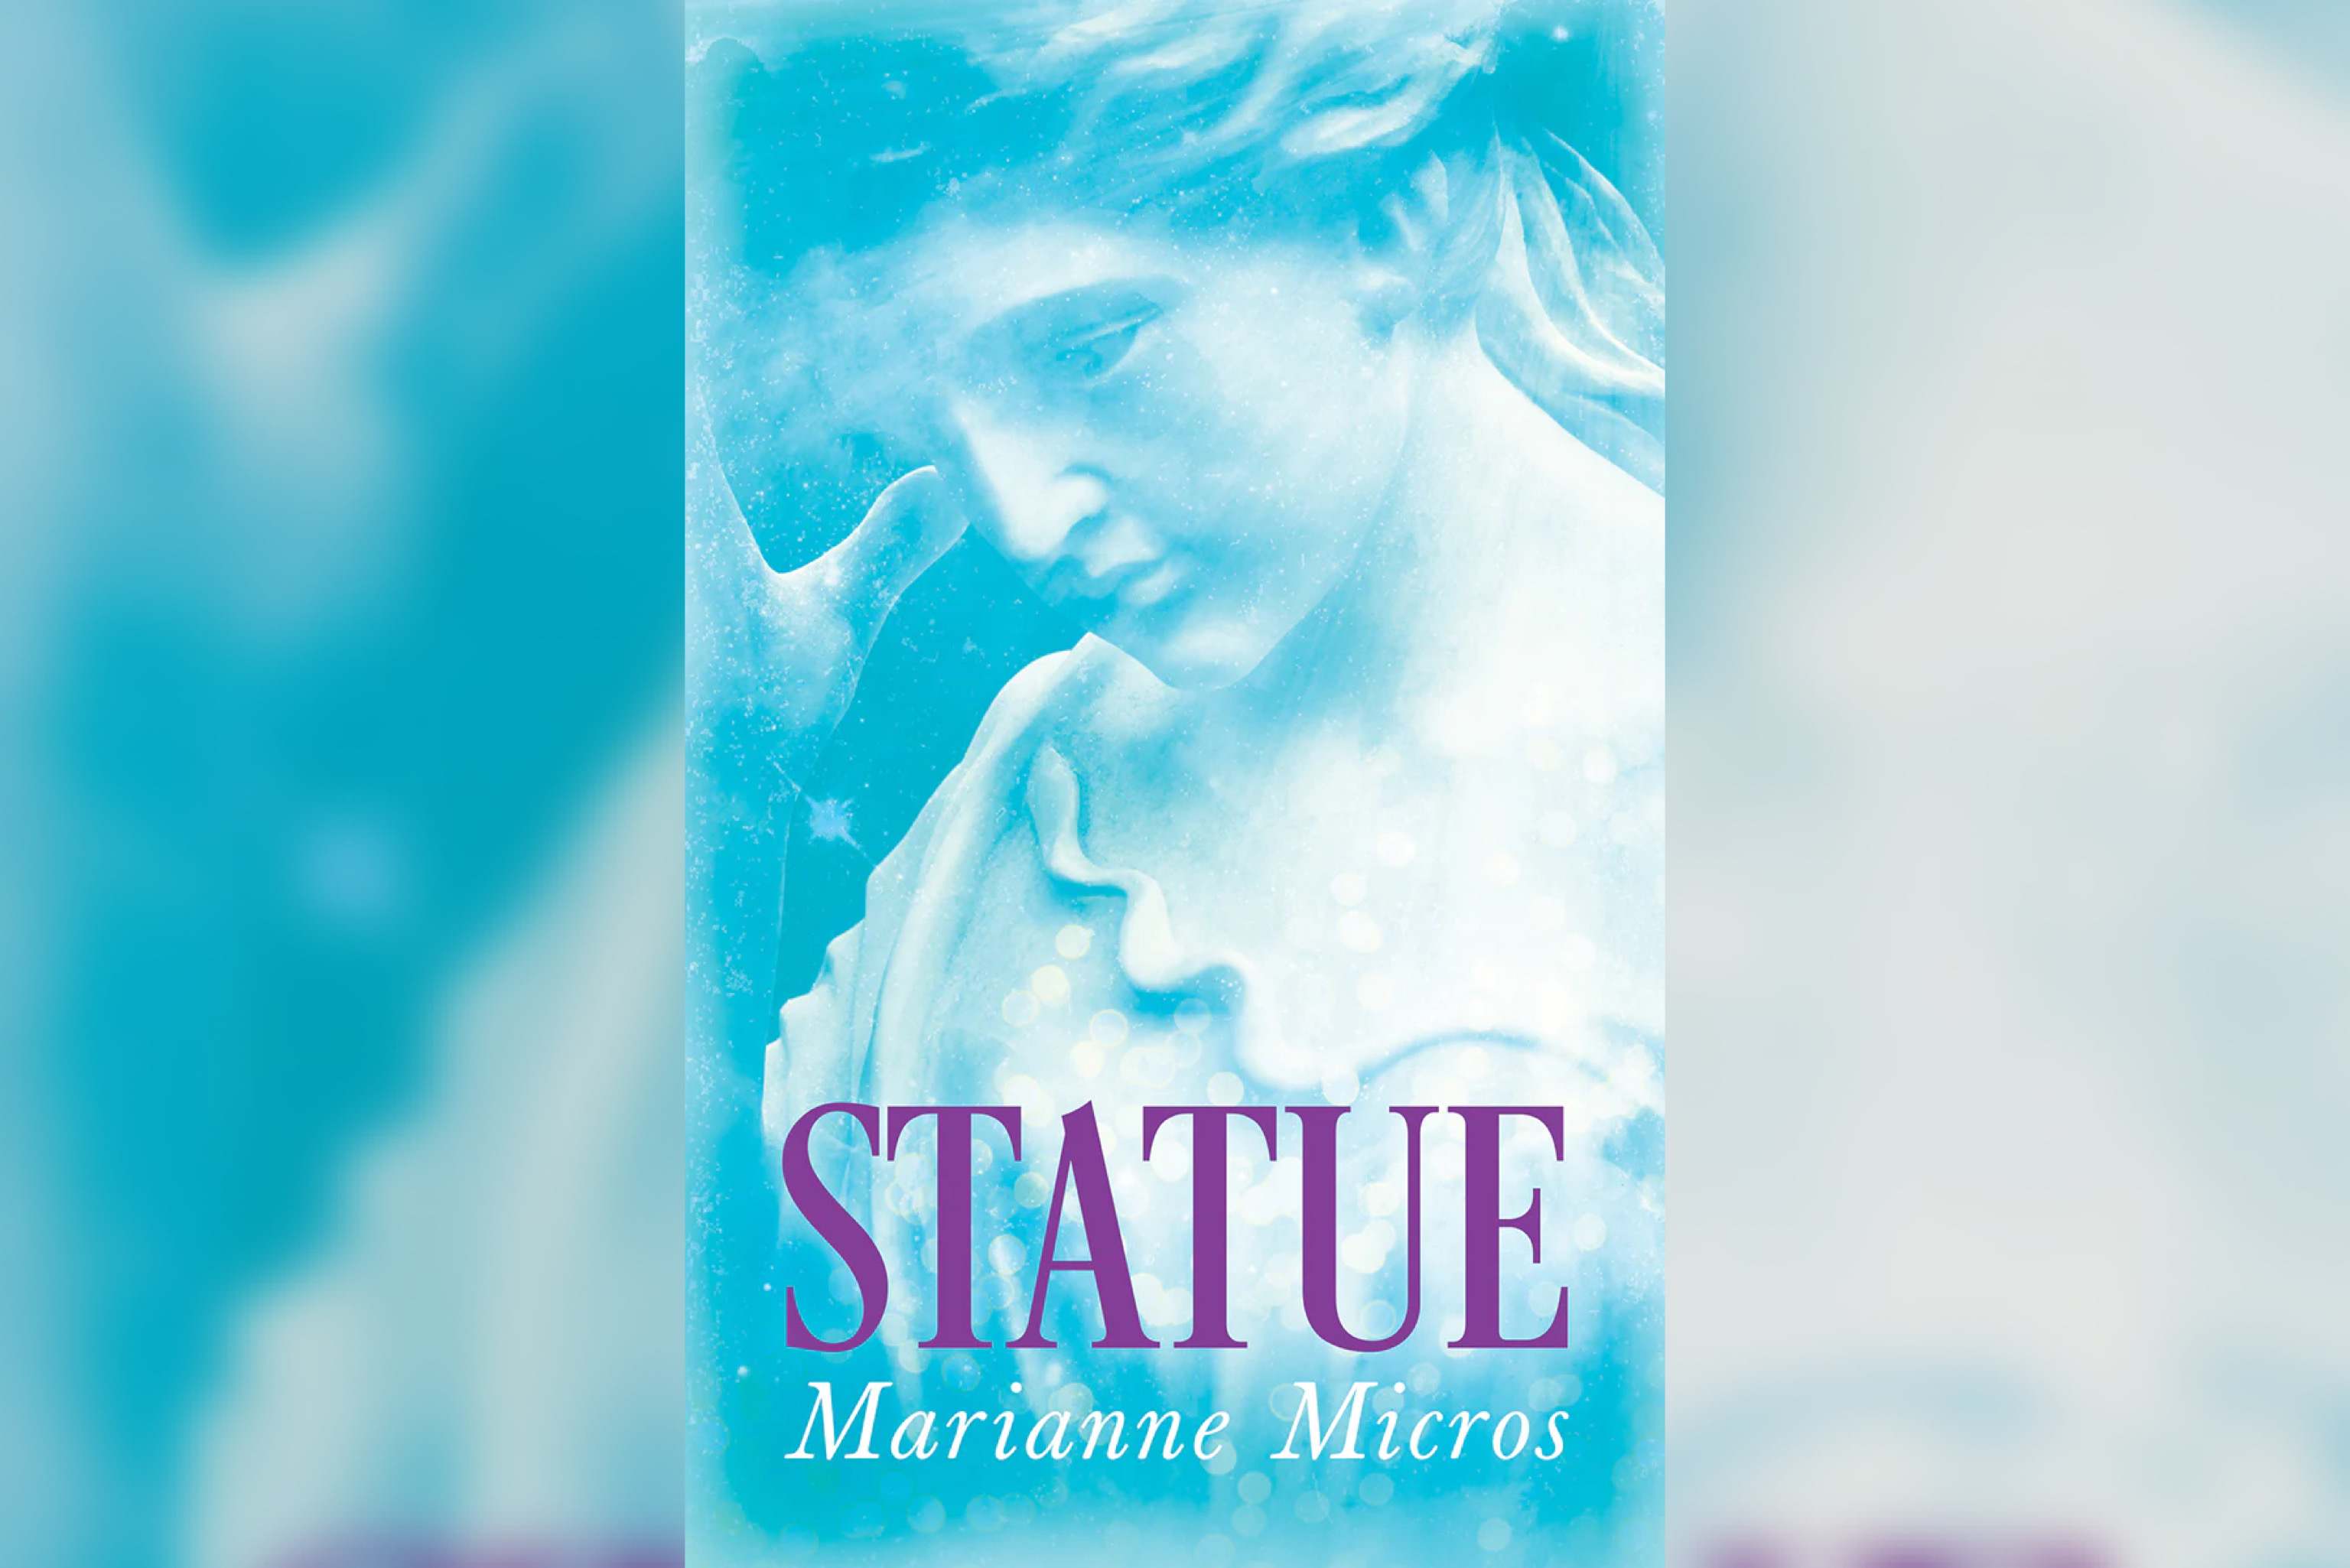 Review: Marianne Micros’ Statue